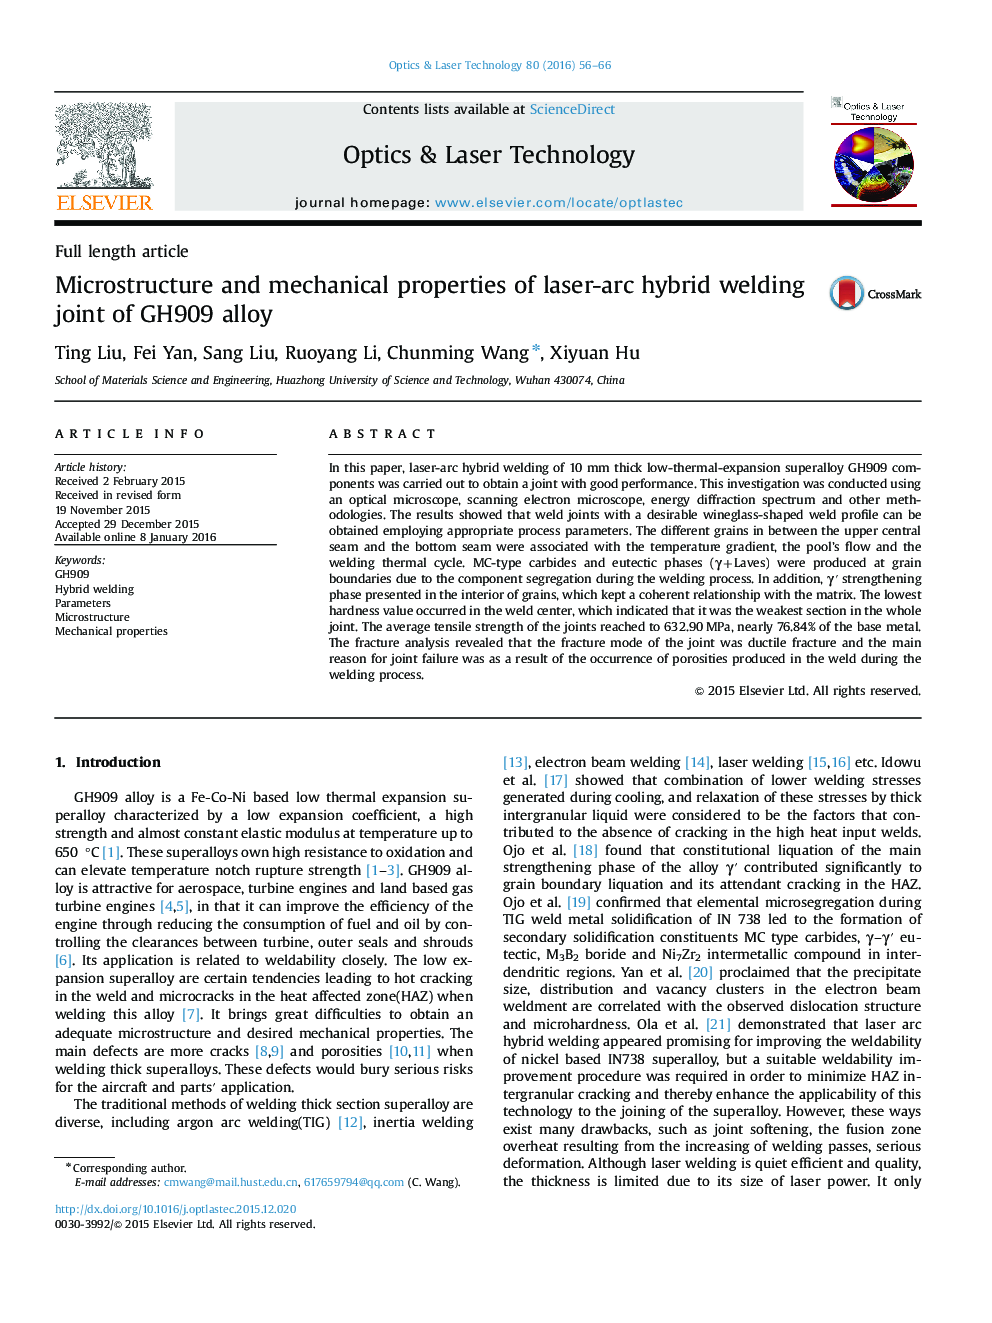 Microstructure and mechanical properties of laser-arc hybrid welding joint of GH909 alloy